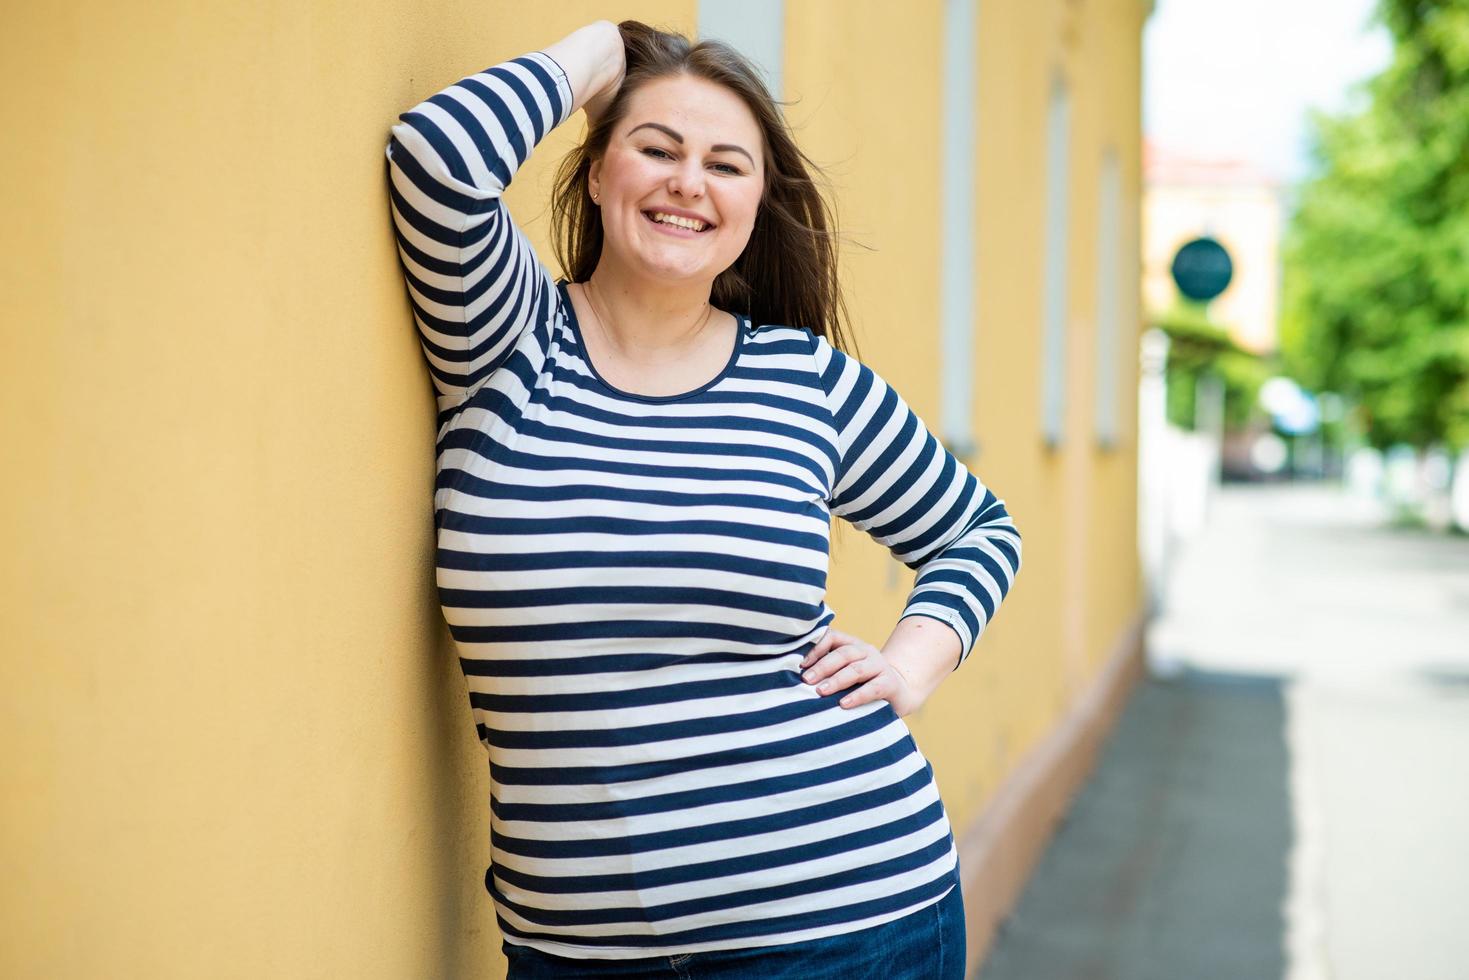 Smiling cheerful woman plus size posing outdoors on orange wall background photo